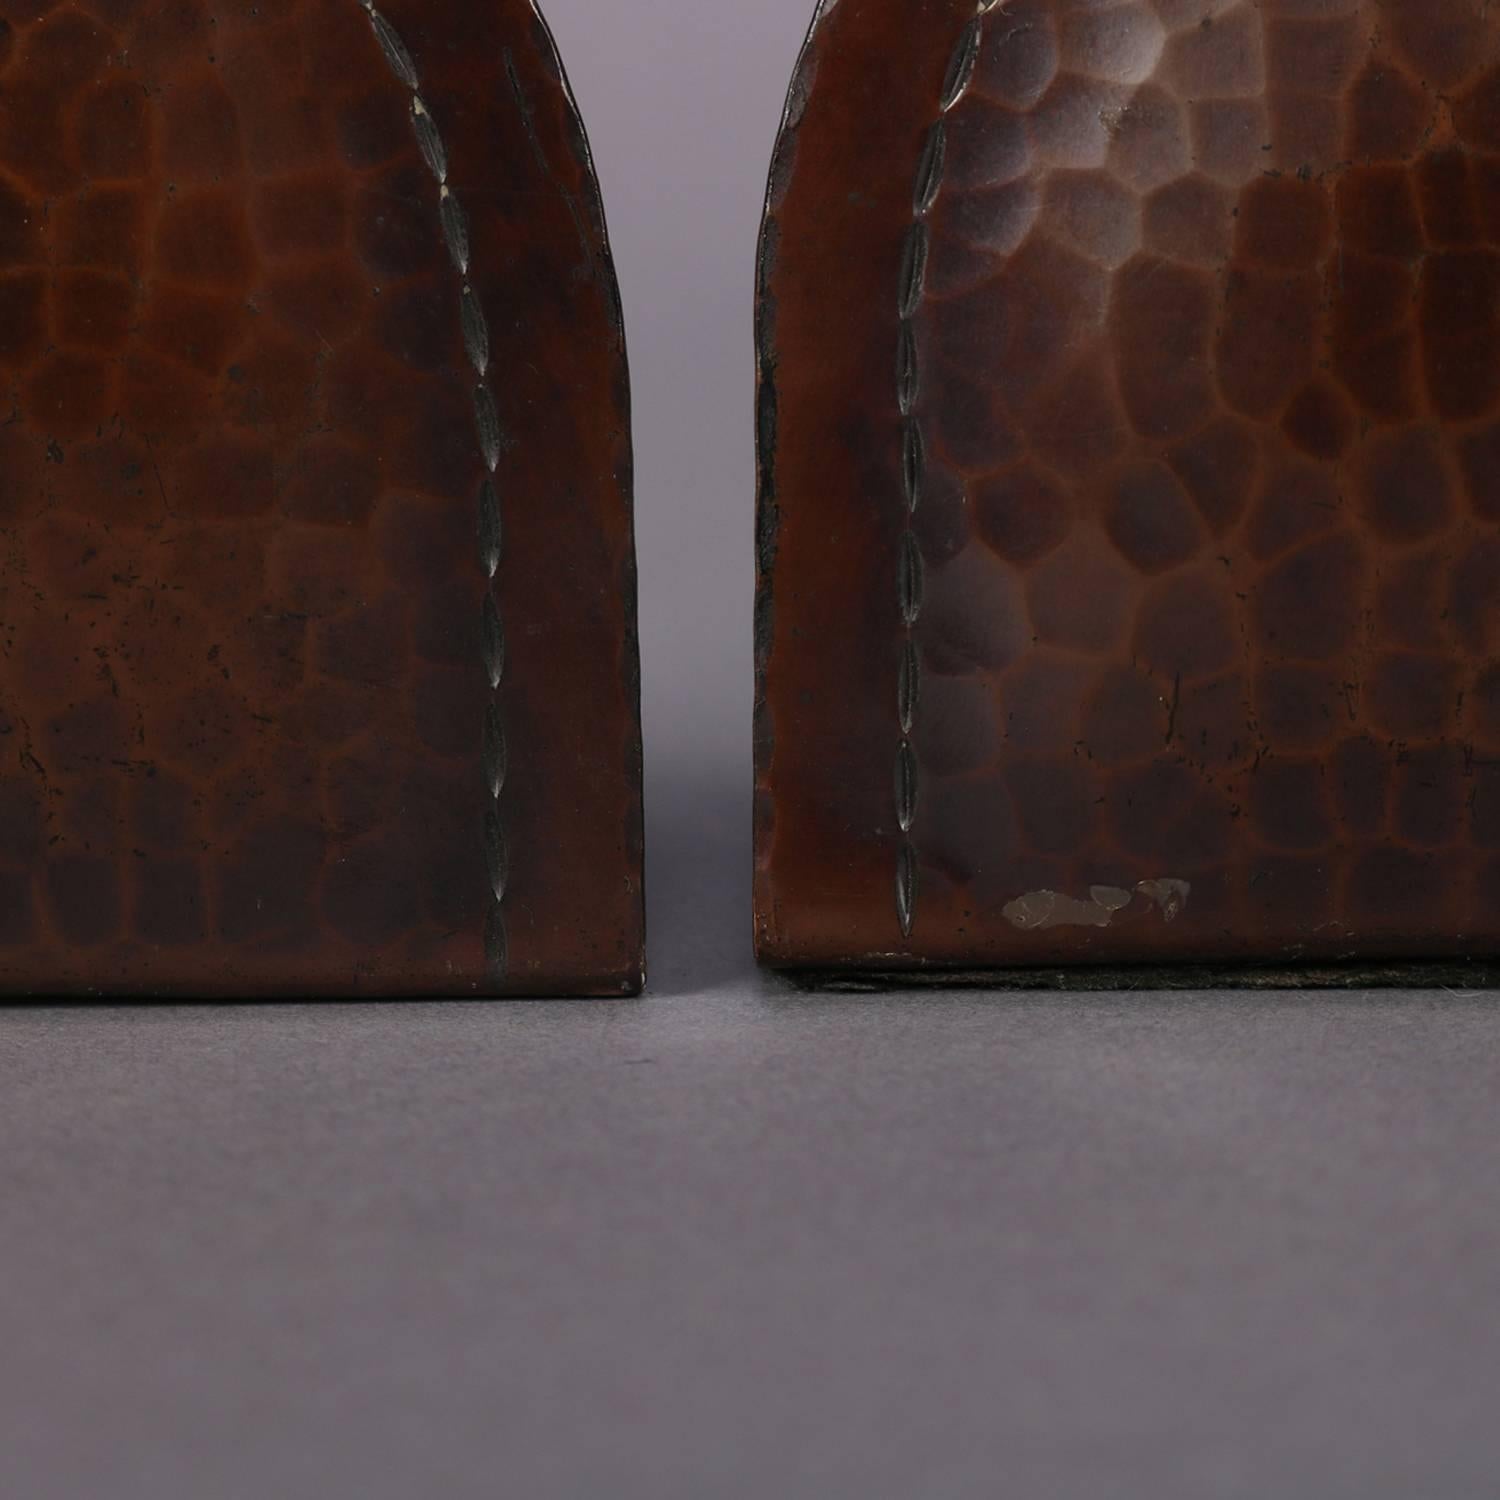 Arts and Crafts Pair of Arts & Crafts Roycroft Hand-Hammered Coppered Metal Bookends, circa 1910